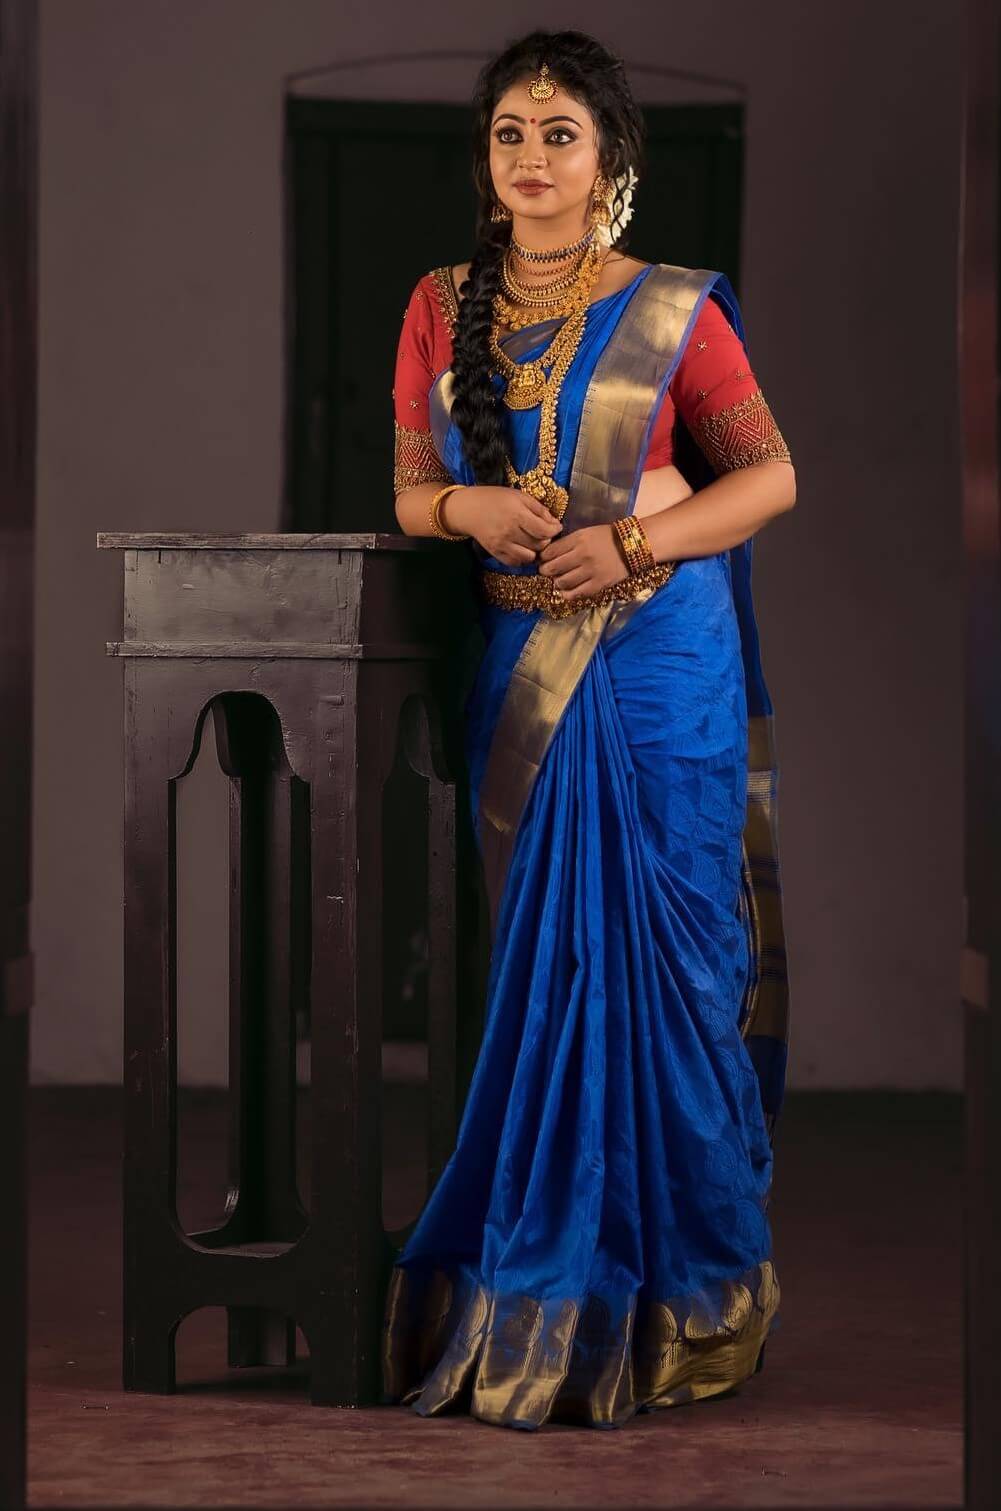 South Actress Arundhathi Nair In Traditional South Indian Saree Look With Heavy Gold Jewellery